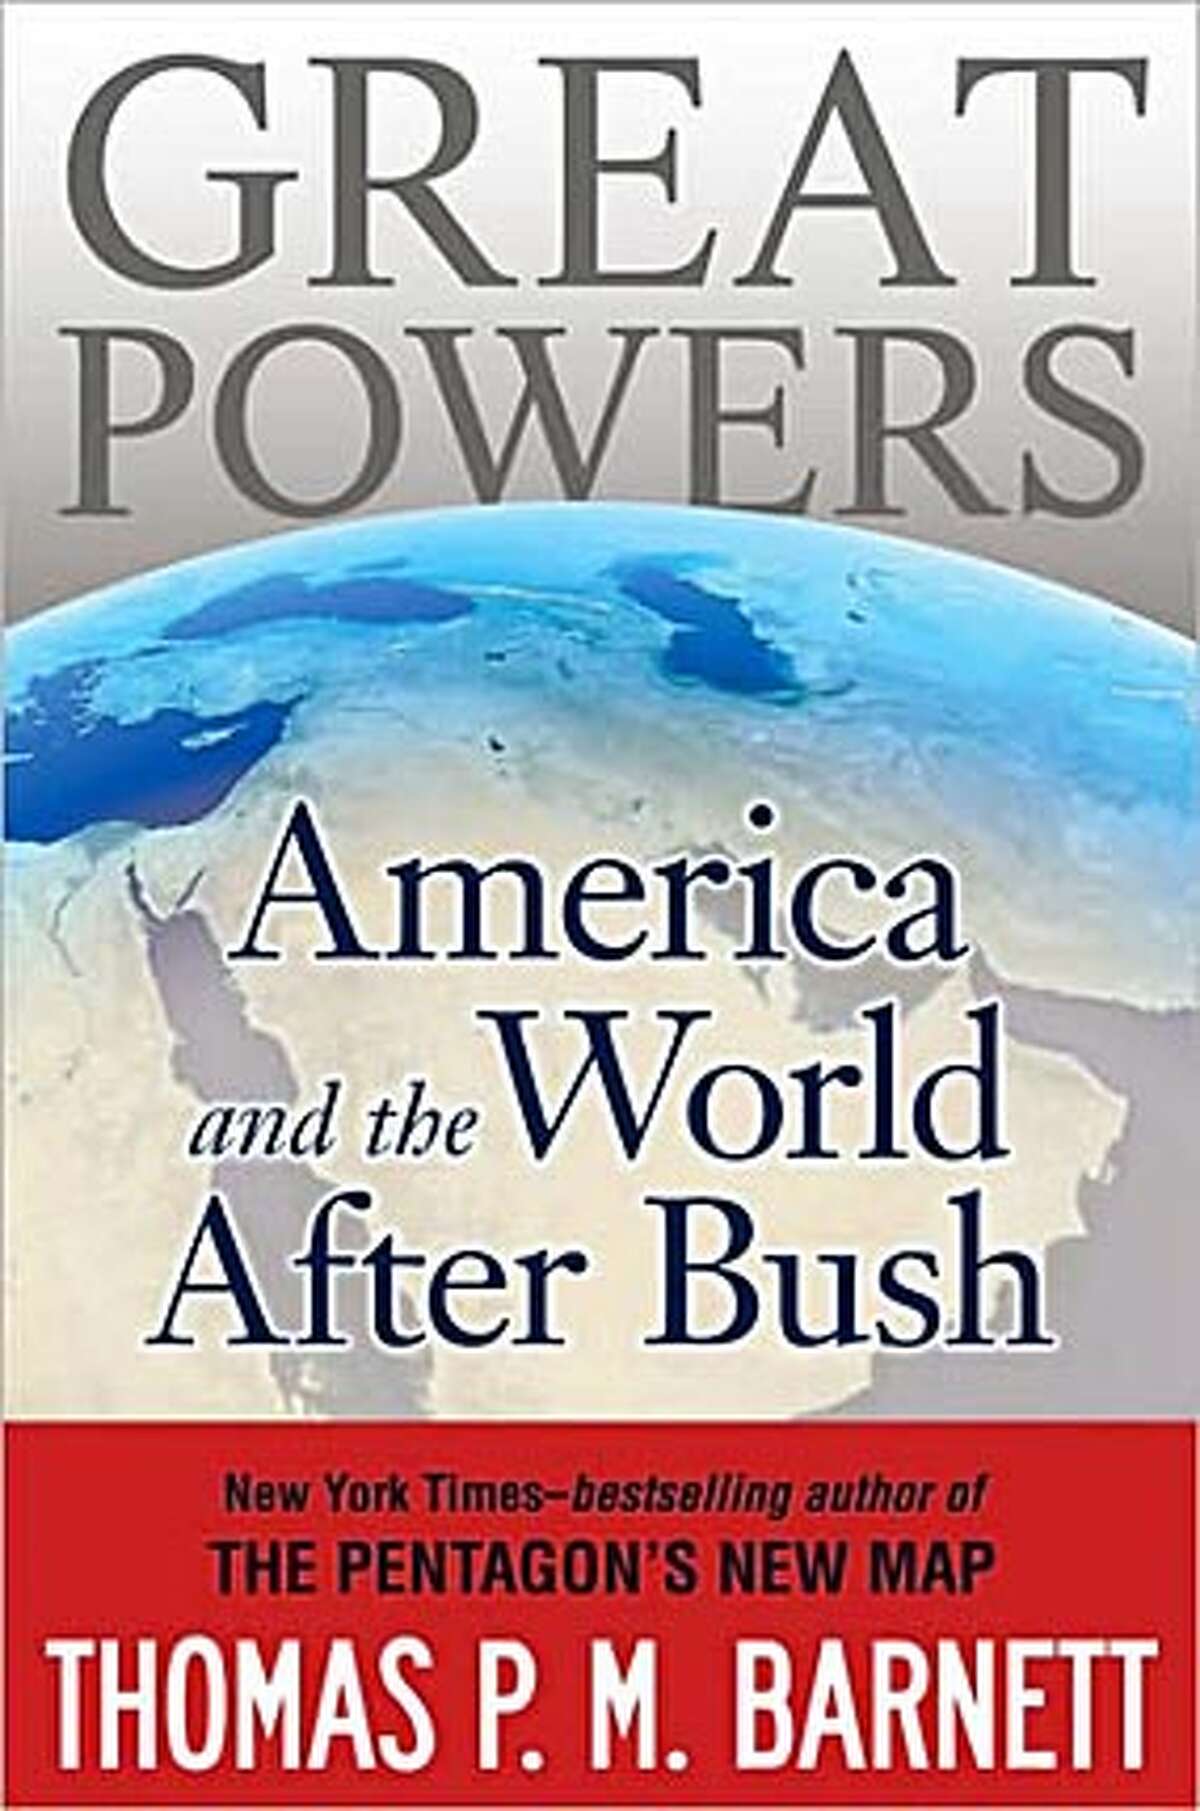 "Great Powers: America and the World After Bush," by Thomas P.M. Barnett